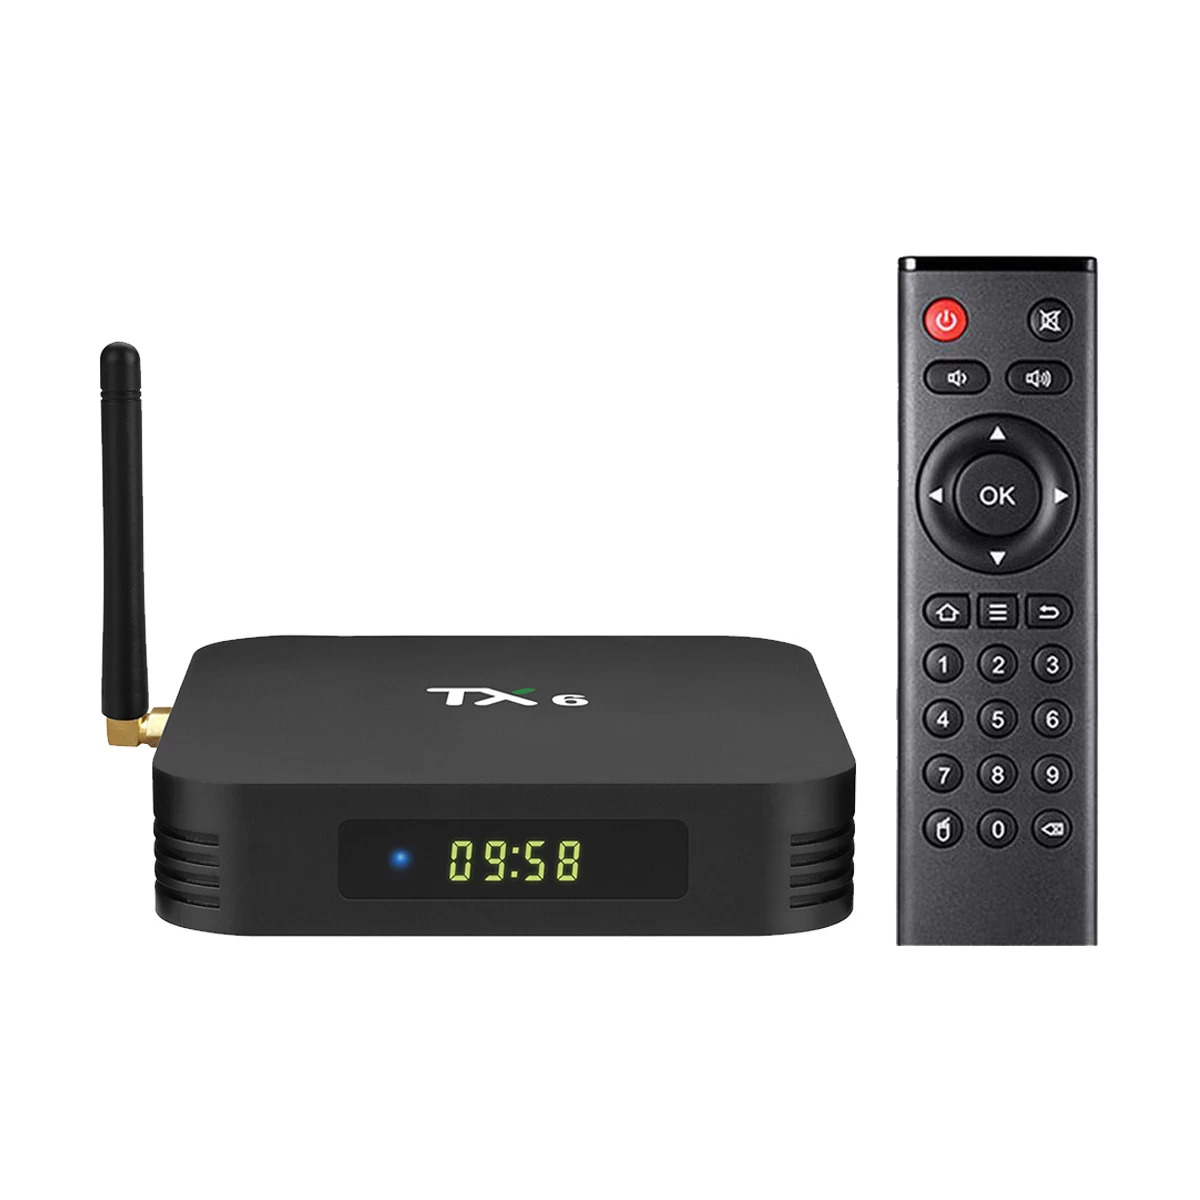 SuperView-ANDROID-TV-BOX-TX6-A-4GB-RAM-32GB-ROM-4K-ULTRA-HD